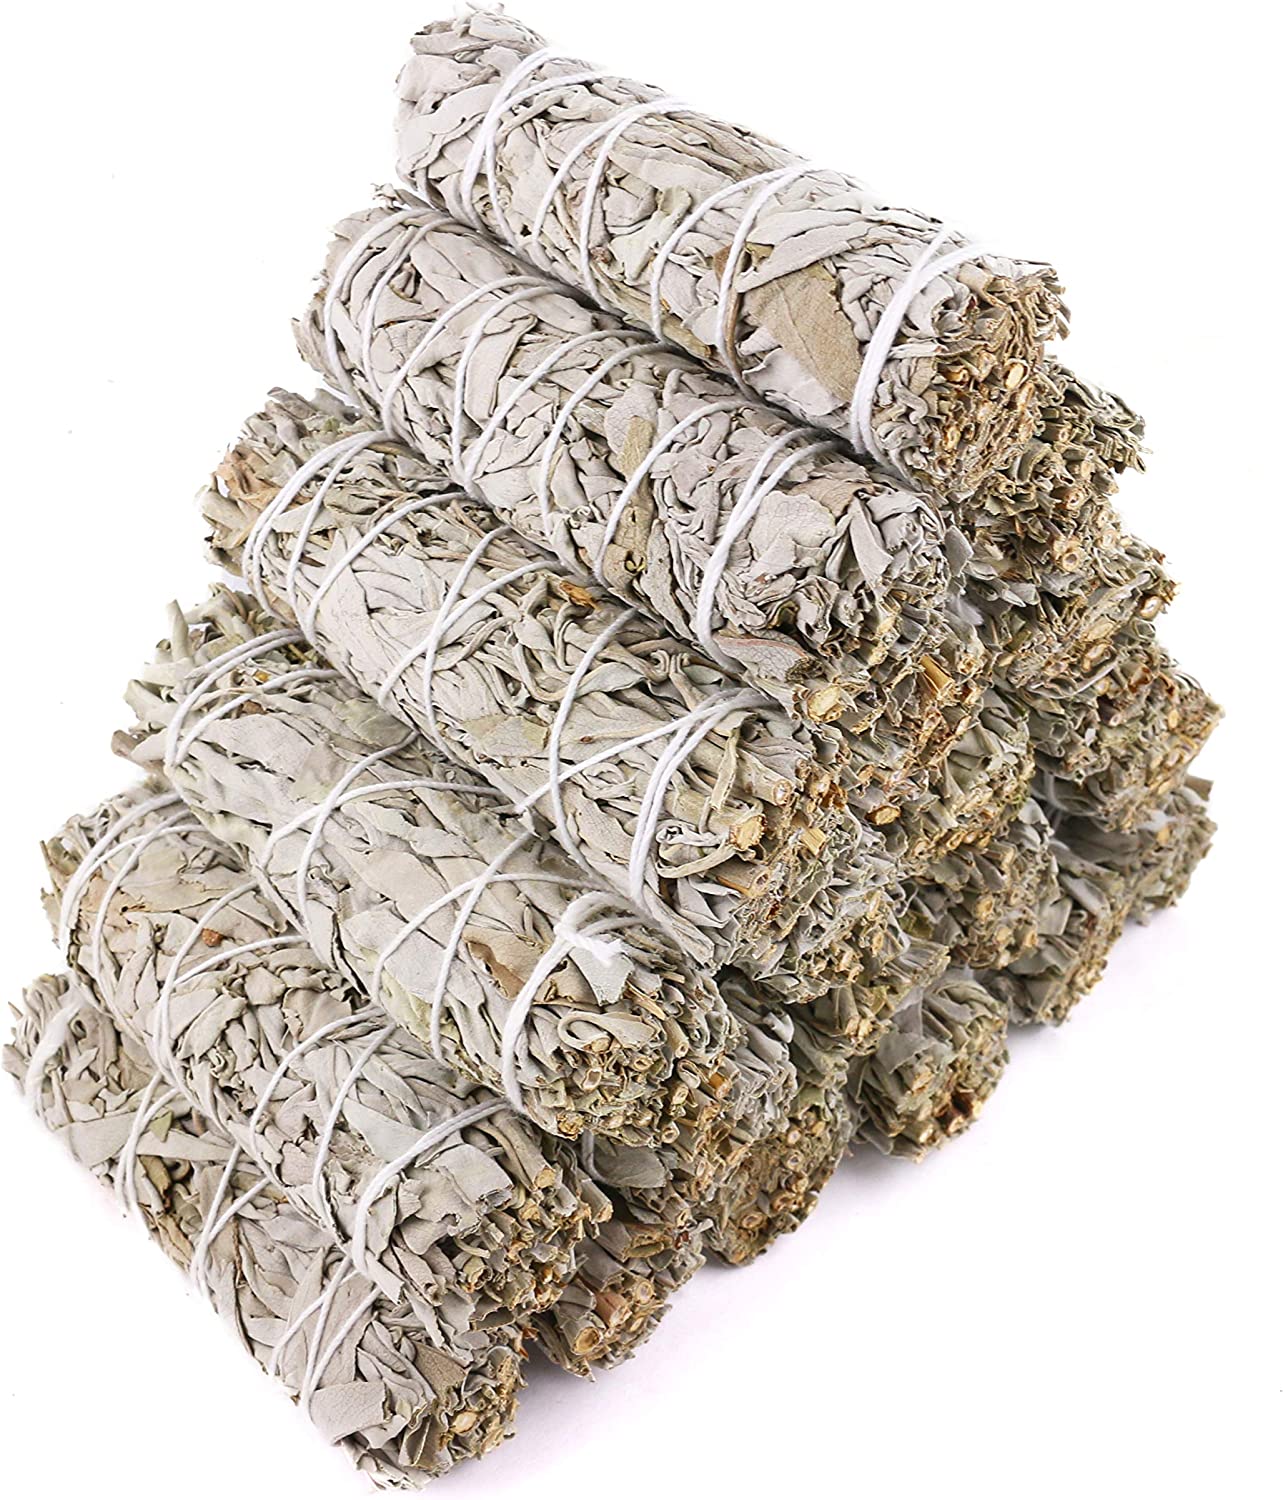 White Sage Smudge Sticks 4 Inch | Organic White Sage Smudging Wands | Bulk Quantities for Home Cleansing, Meditation, & Smudging Rituals - Head Art Works